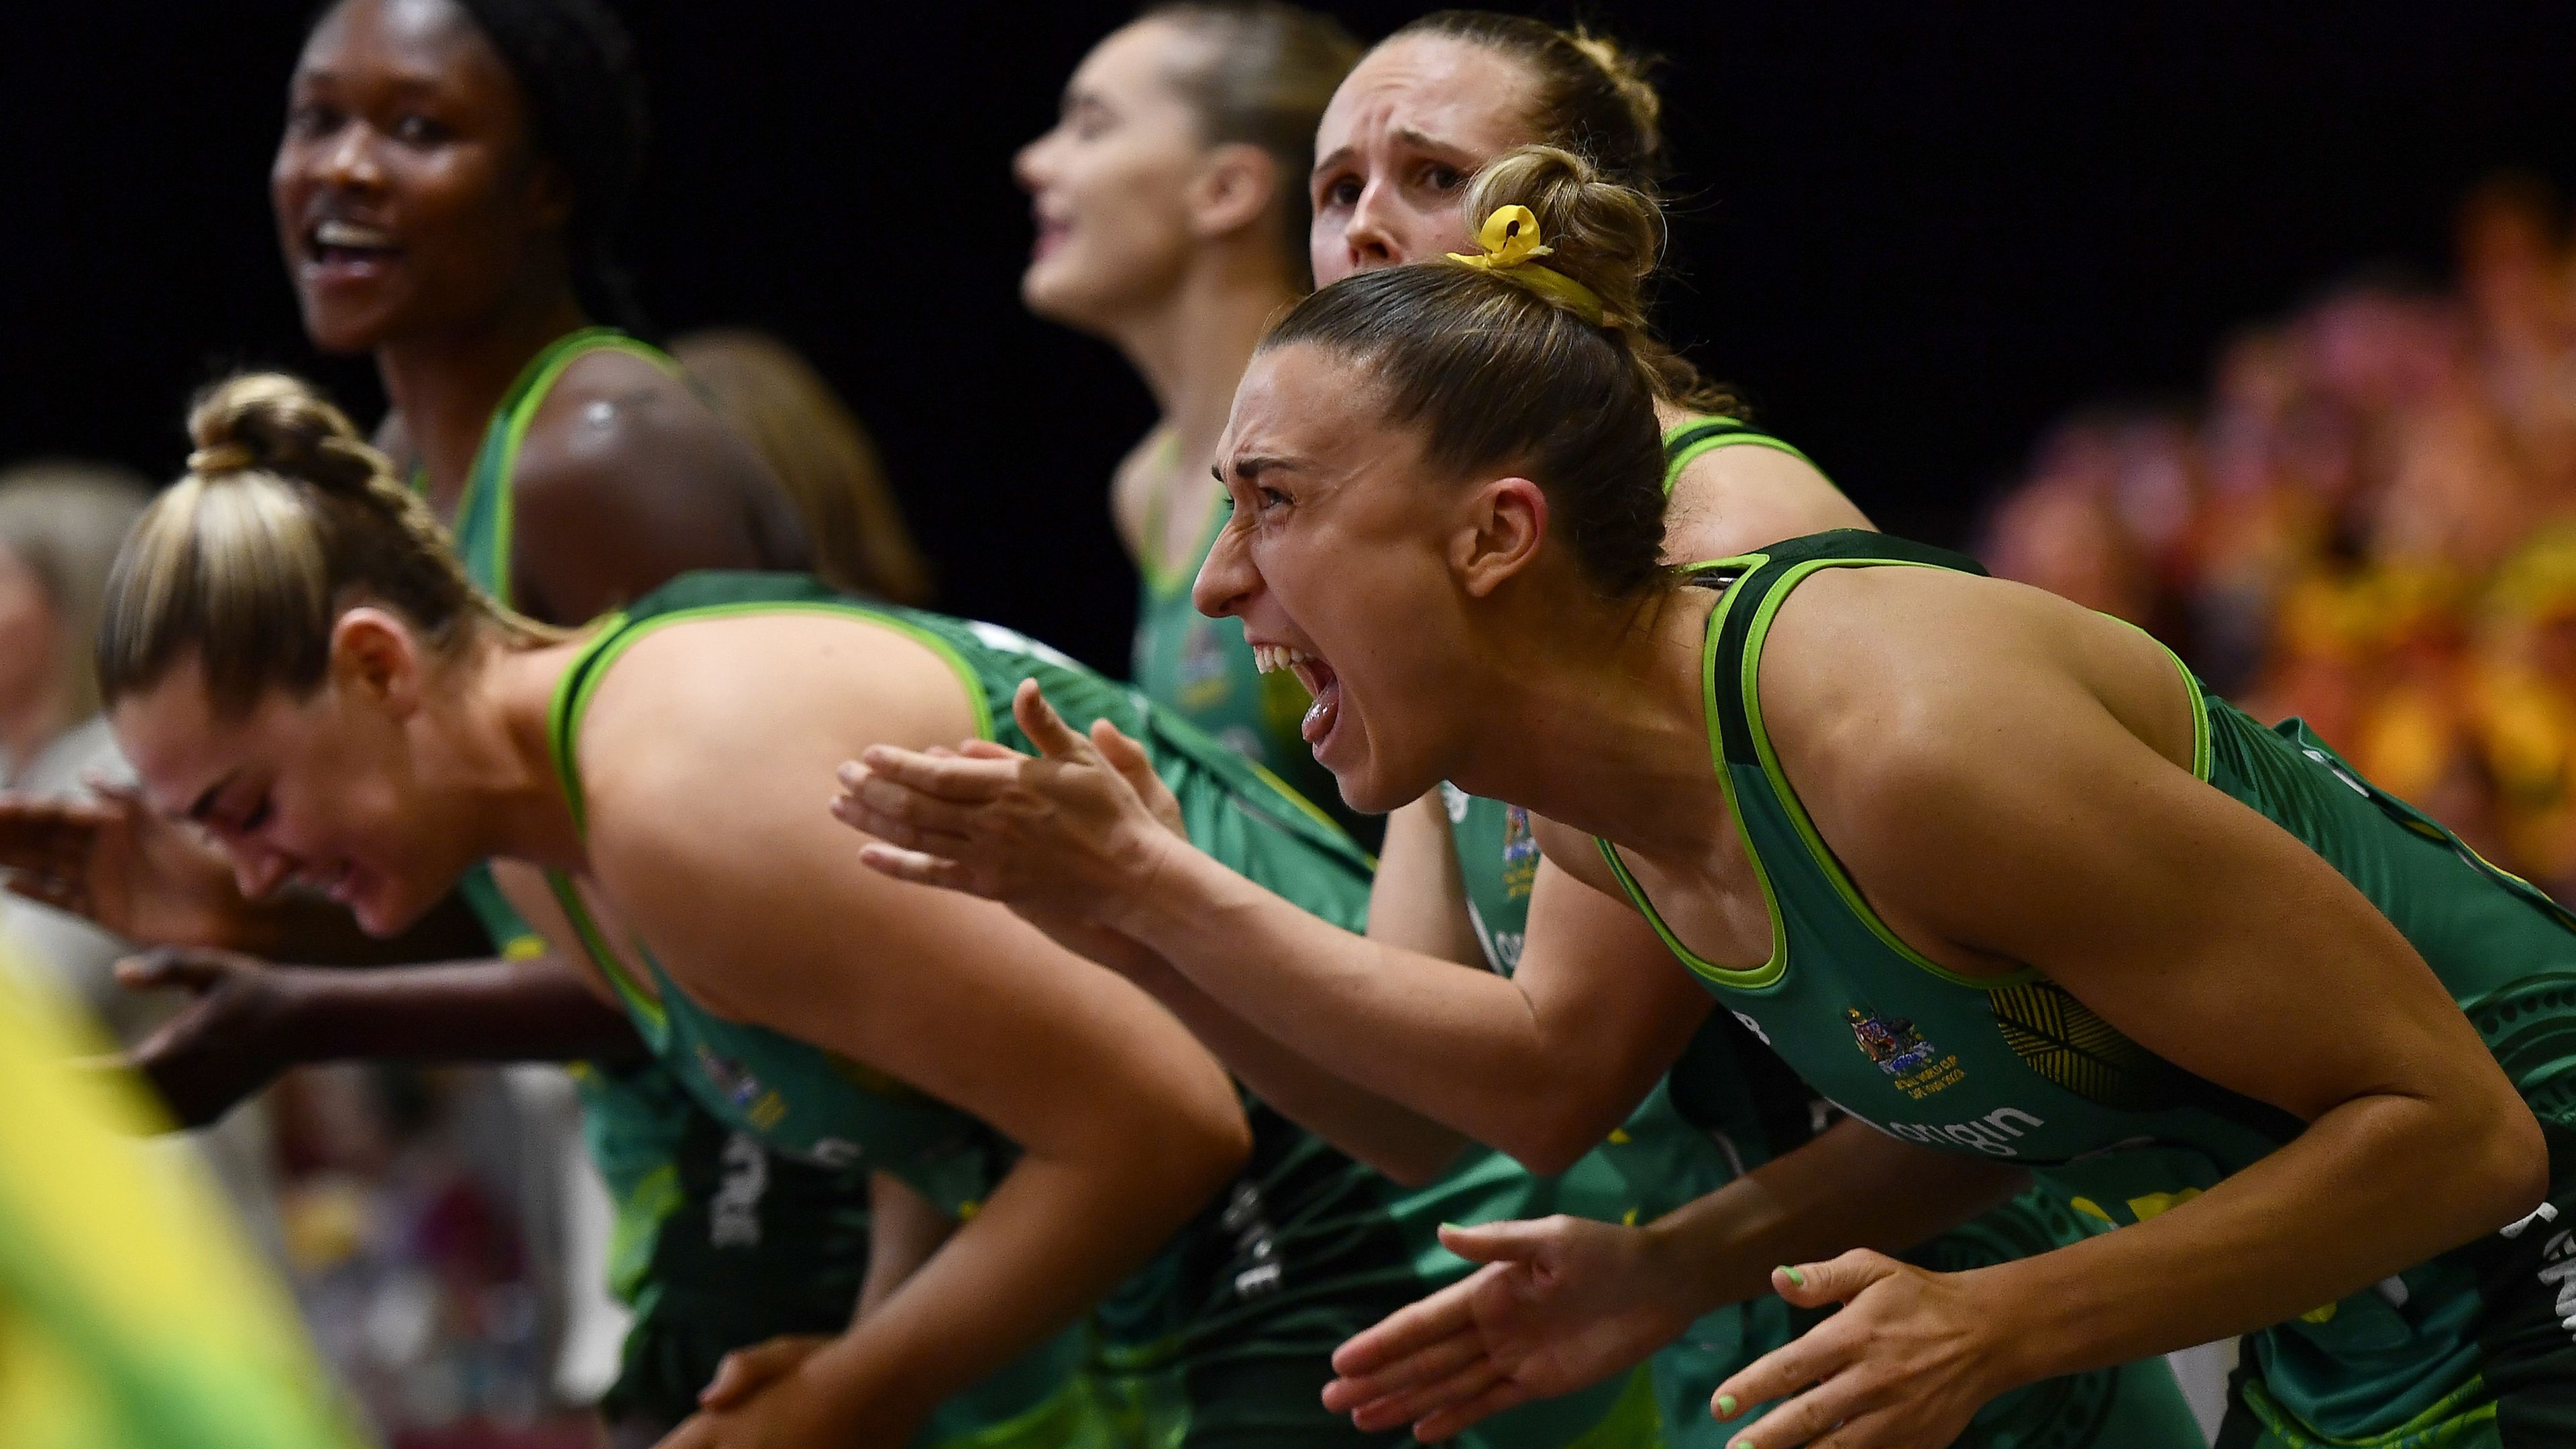 Australia defeat Jamaica to make it through to yet another Netball World Cup final